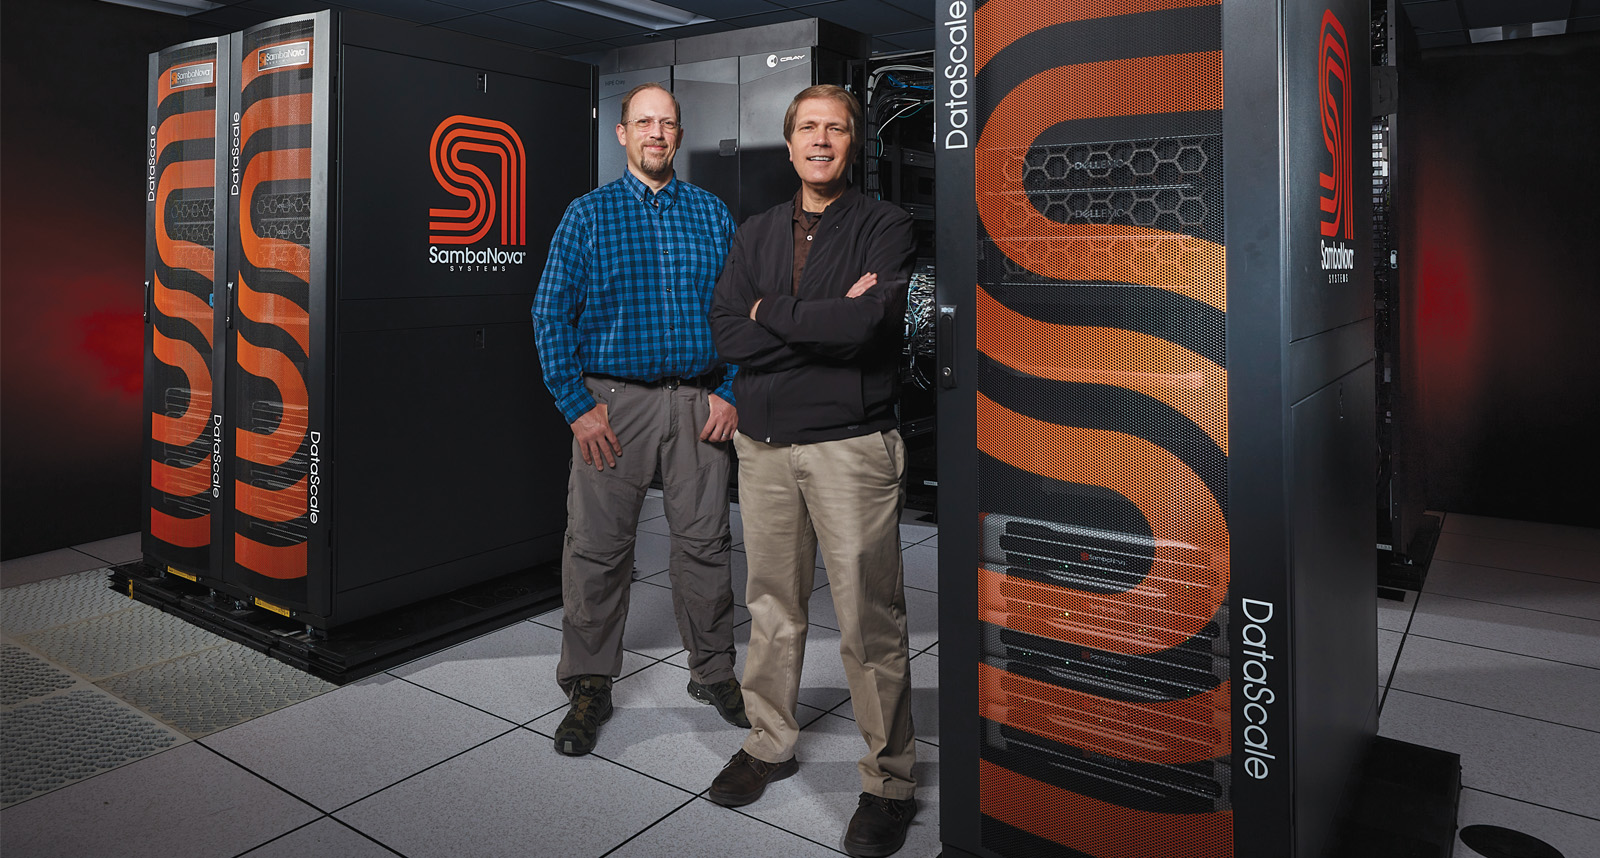 LLNL computer scientists stand by the new SambaNova artificial intelligence hardware that upgrades the Laboratory’s cognitive simulation capabilities.